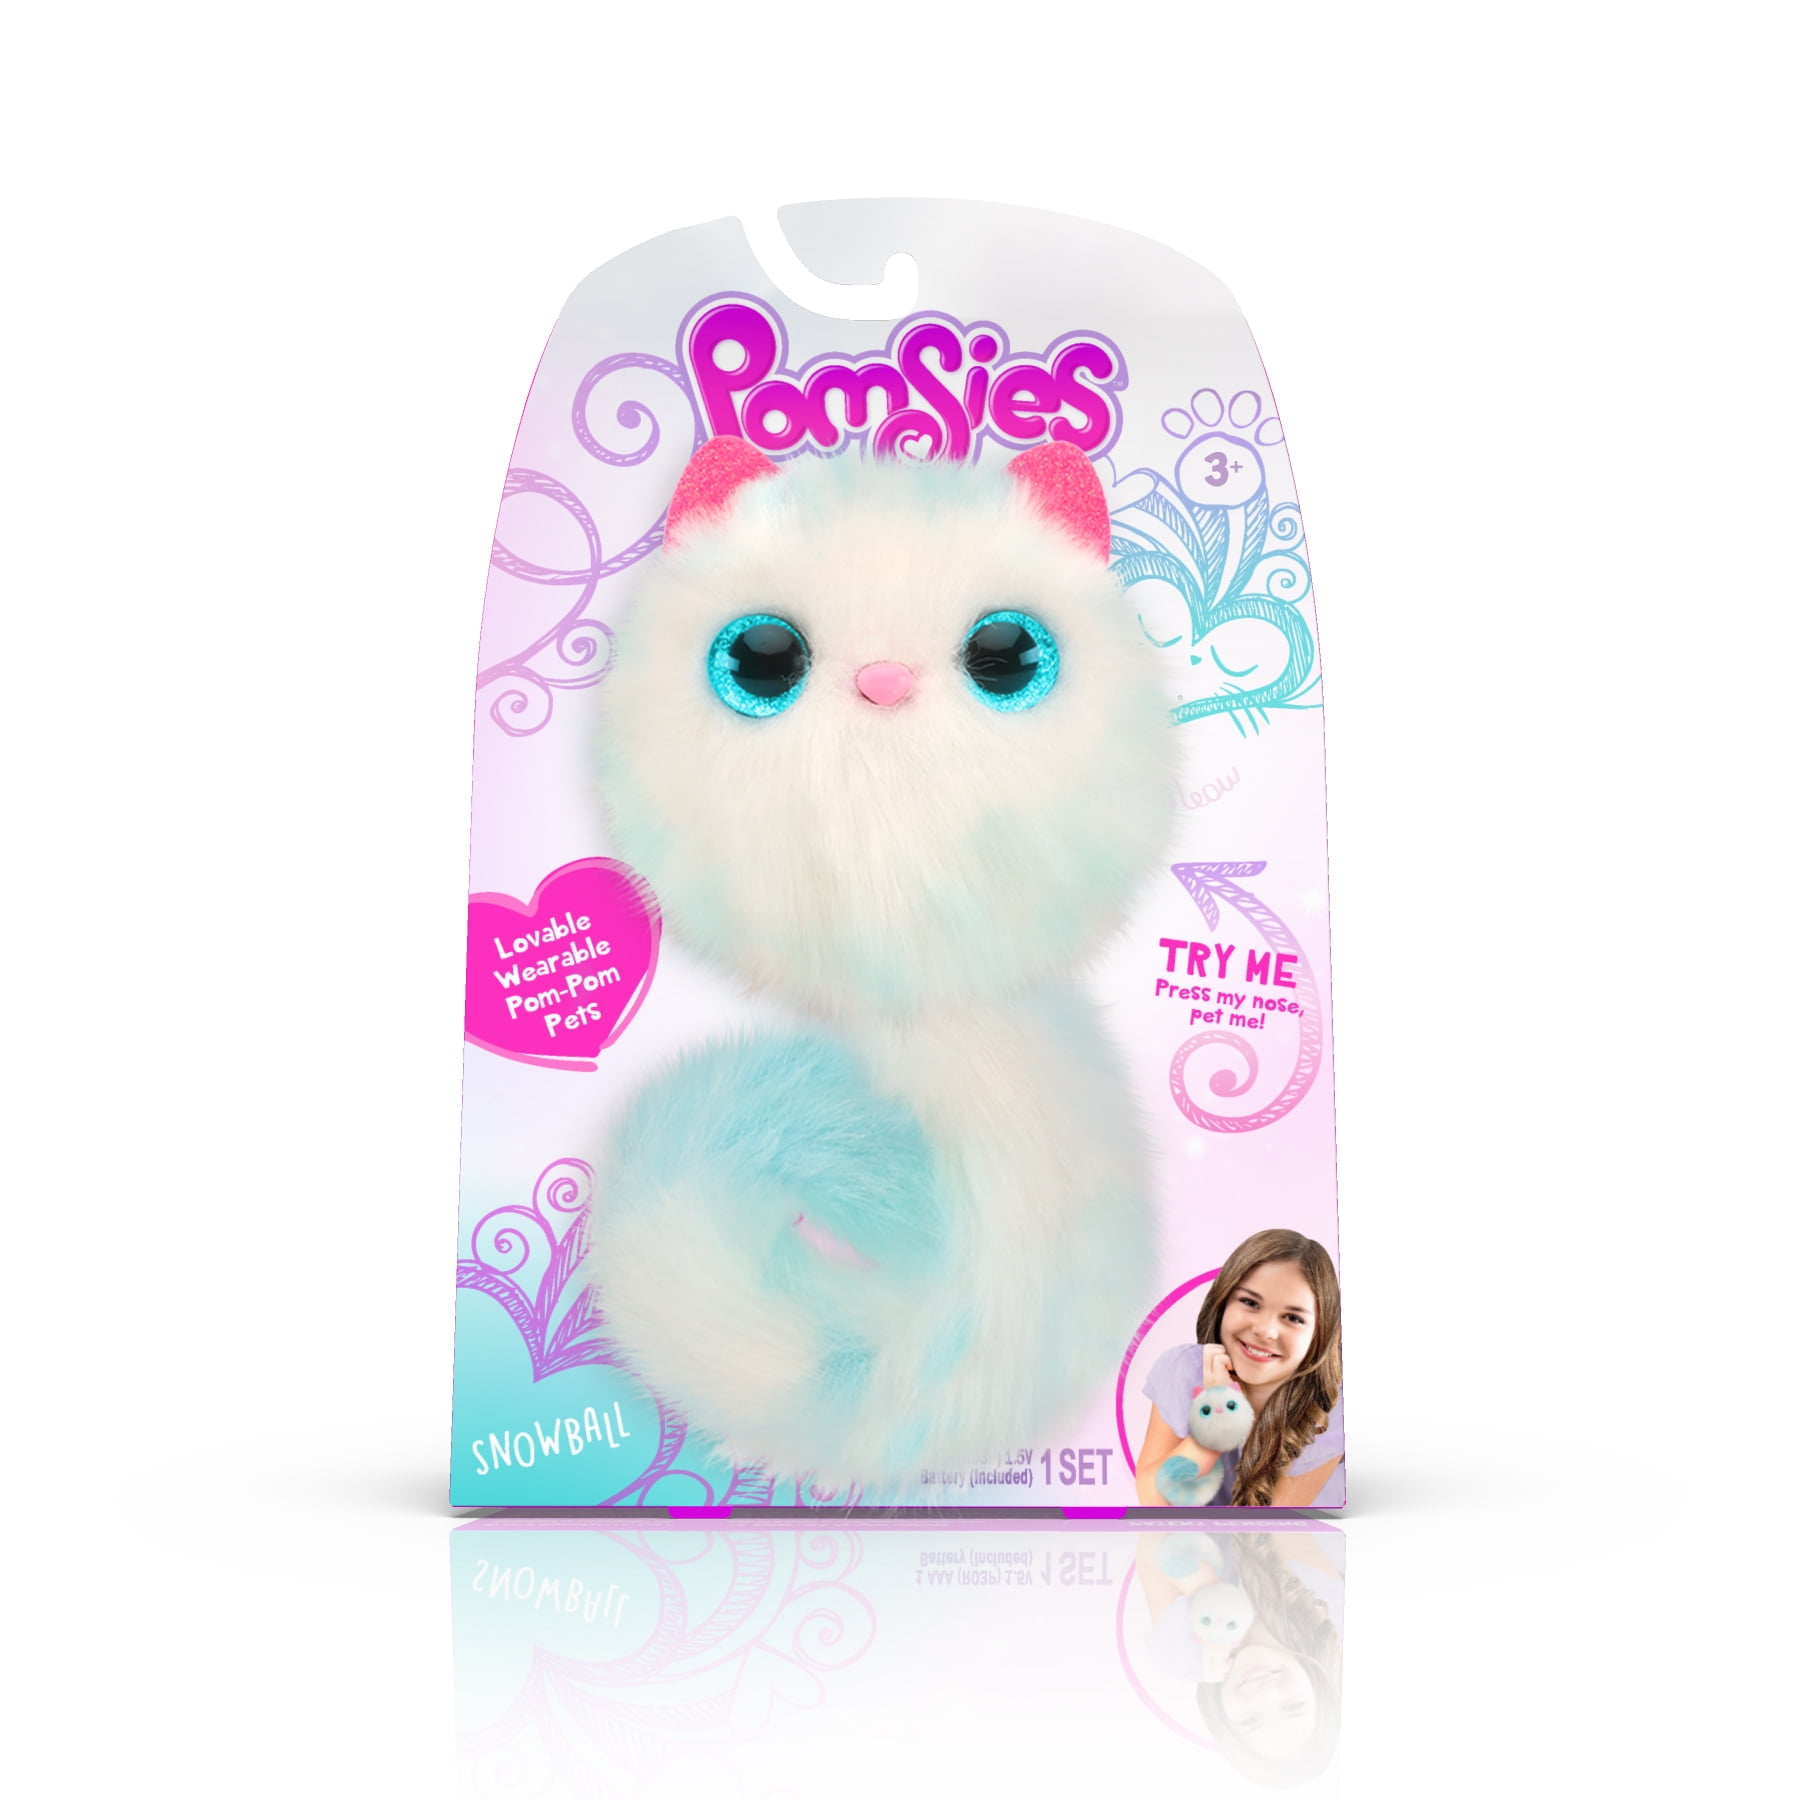 Pomsies SHERBET 50 Sounds Reactions New Toy For 2018 Walmart Exclusive 